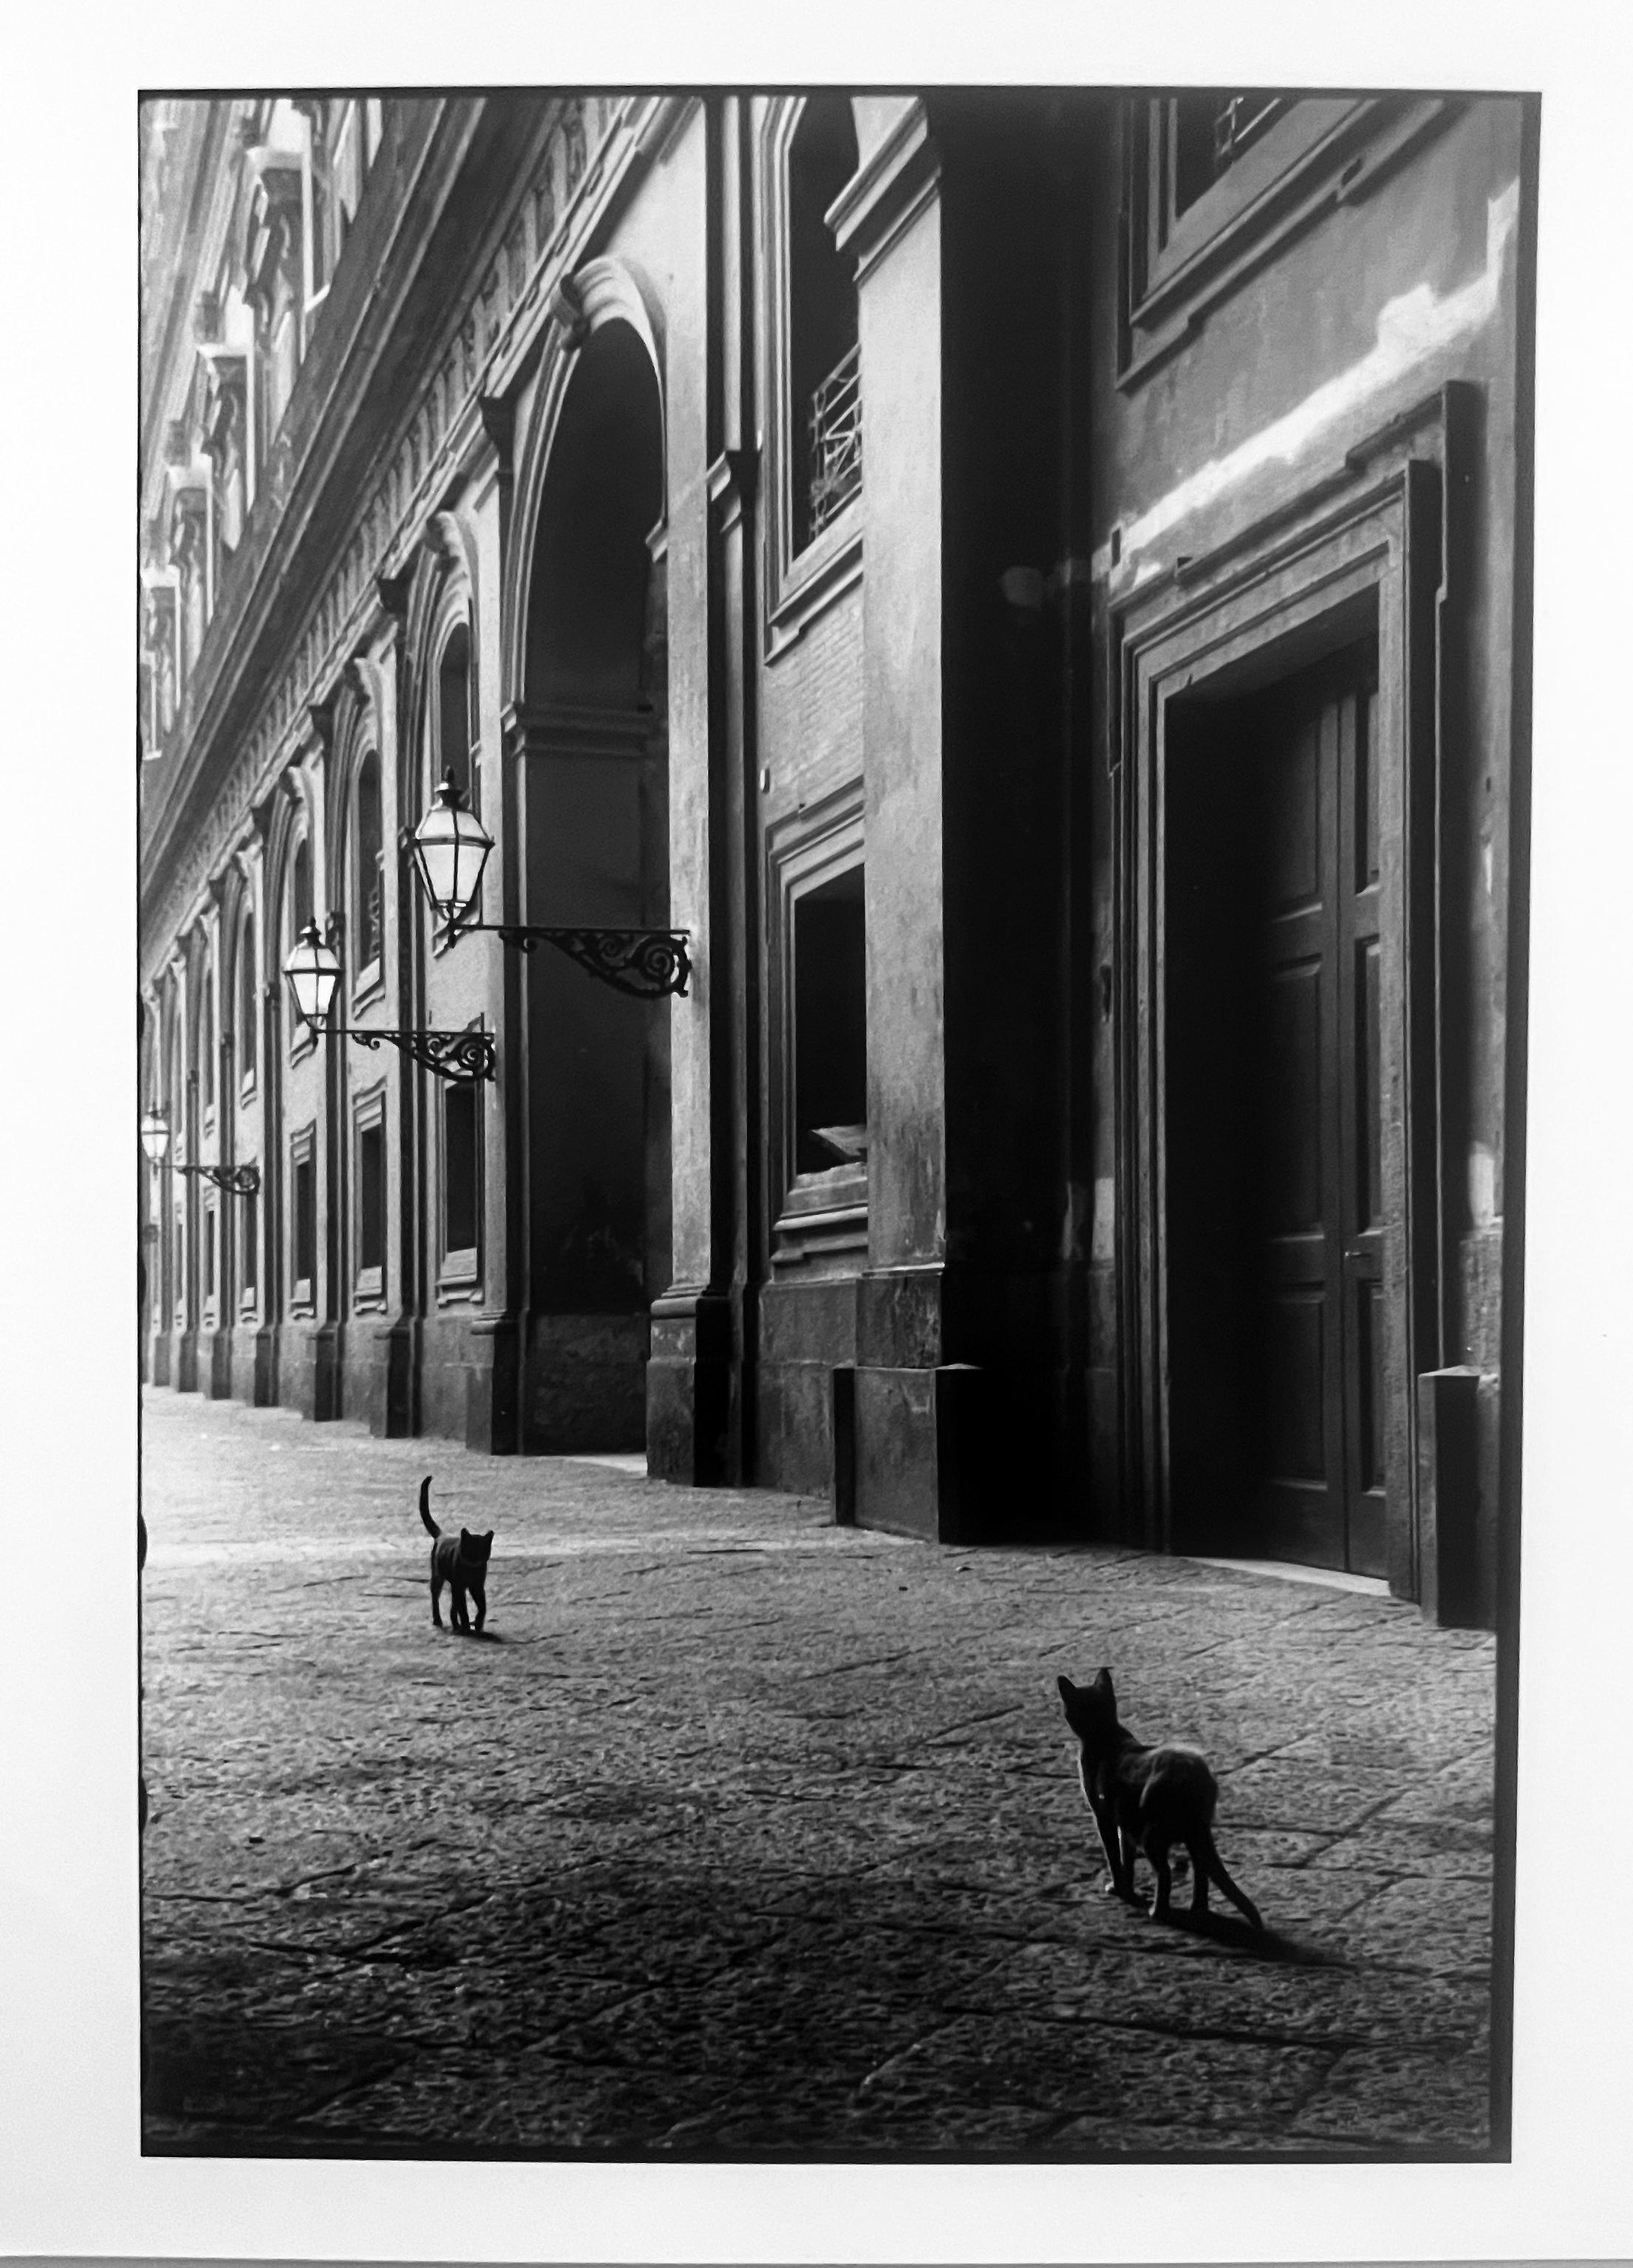 Cats, Naples, Italy, Black and White Street Photography 1950s